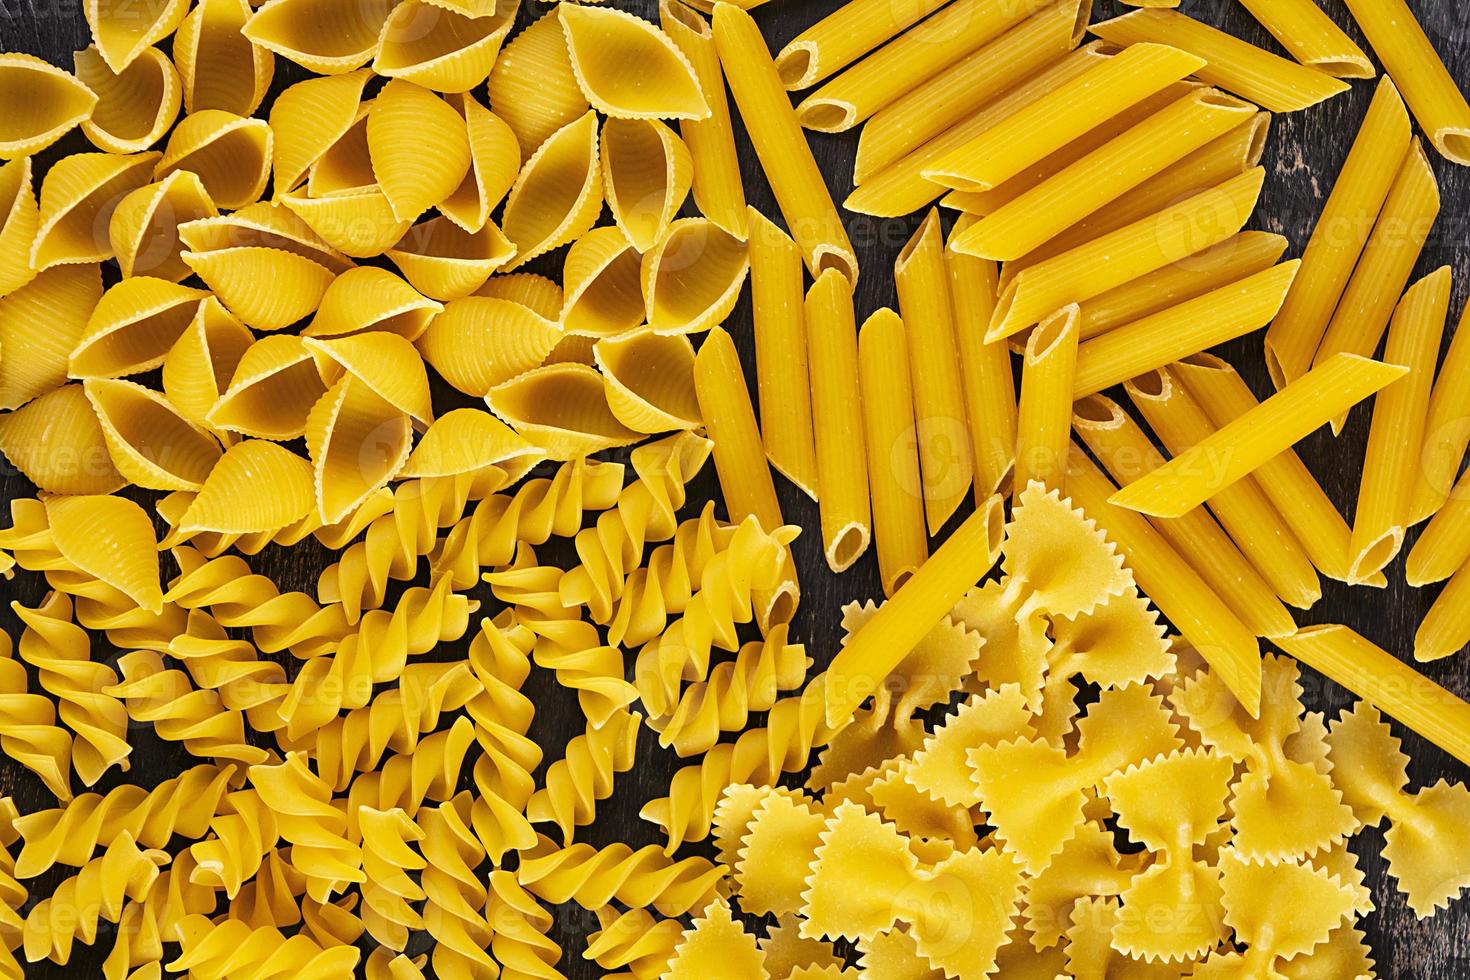 Different dry pasta on a wooden background. Top view photo